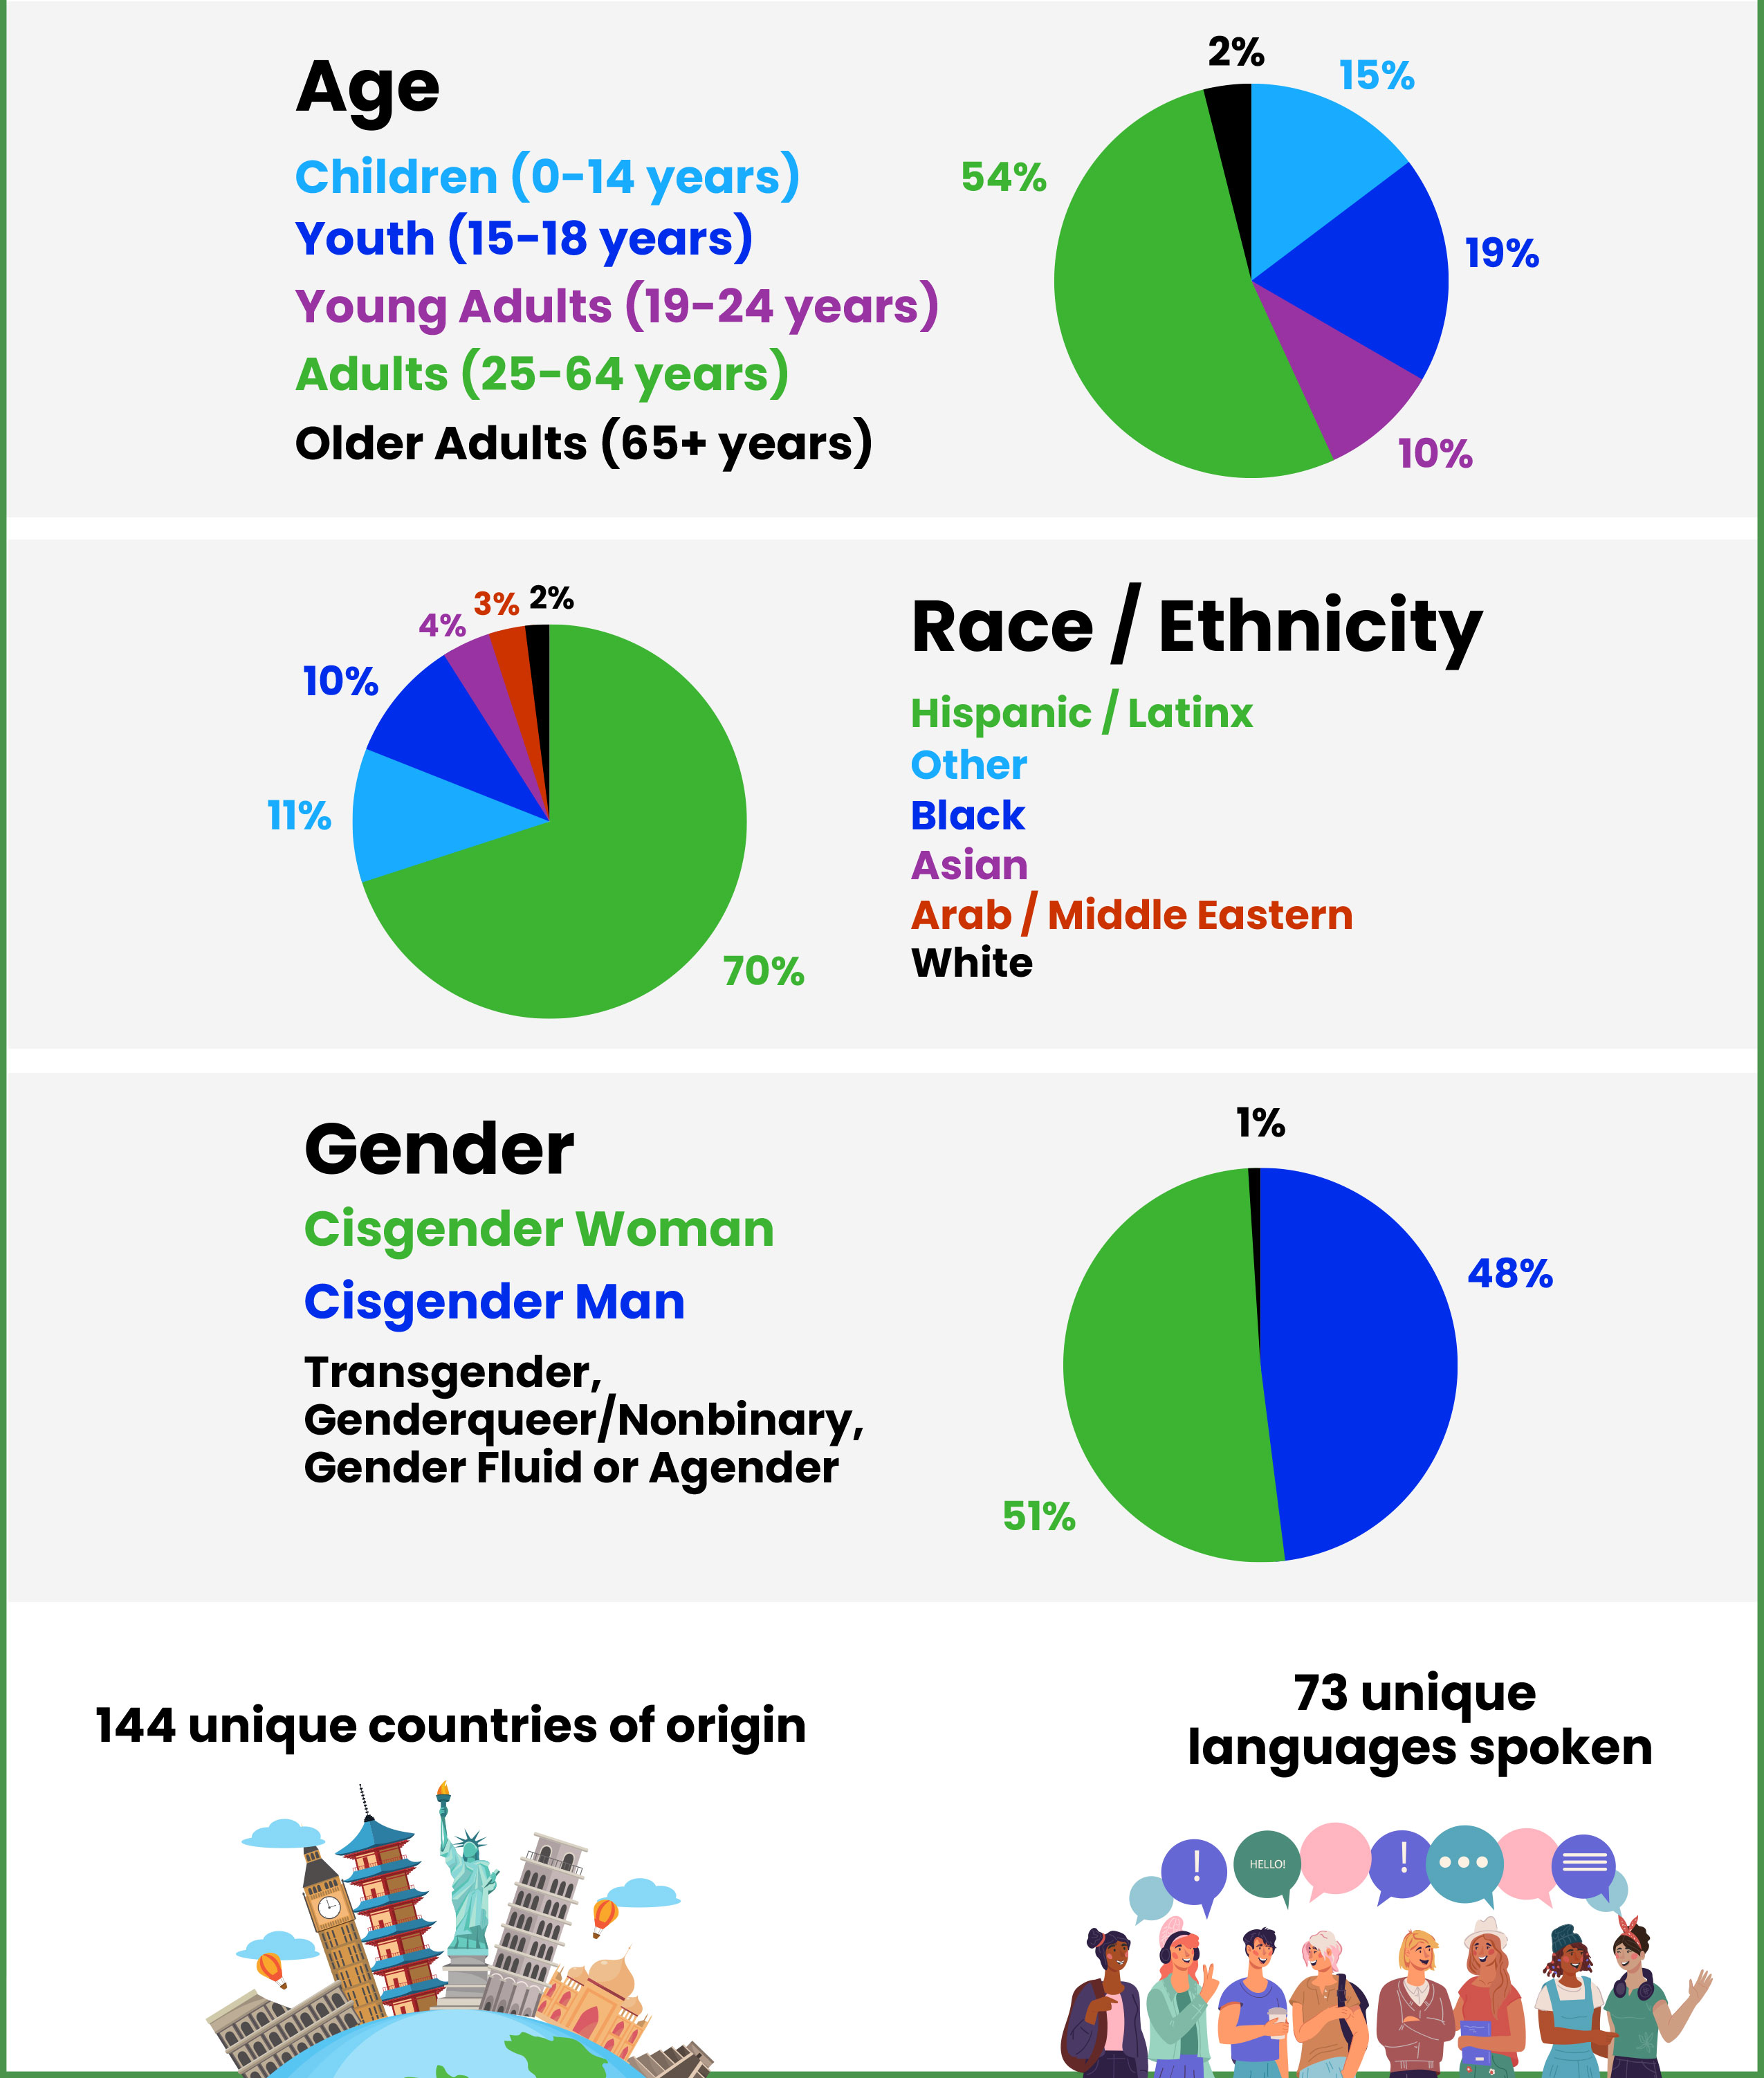 A series of charts showing the diversity of NIJC's client demographics in age, race and ethnicity, gender, countries of origin, and languages spoken